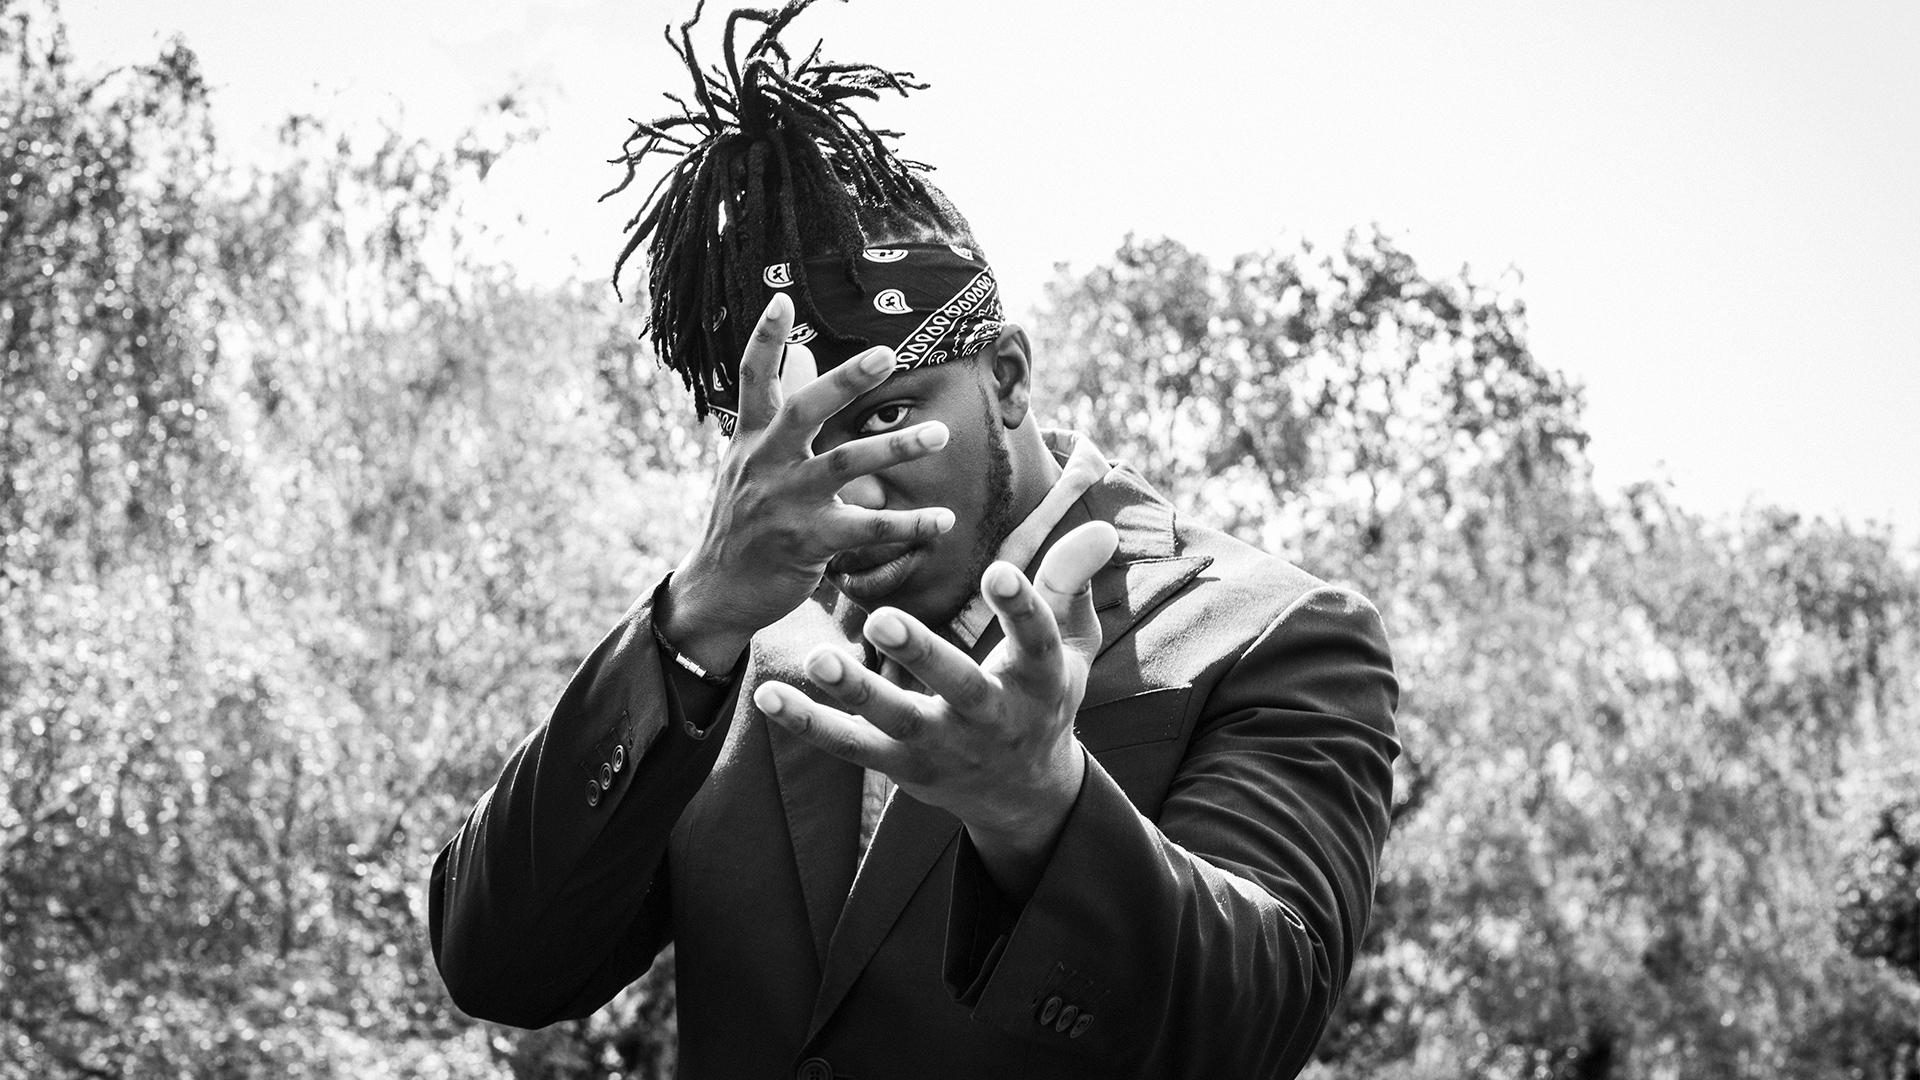 KSI photographed by Lee Malone